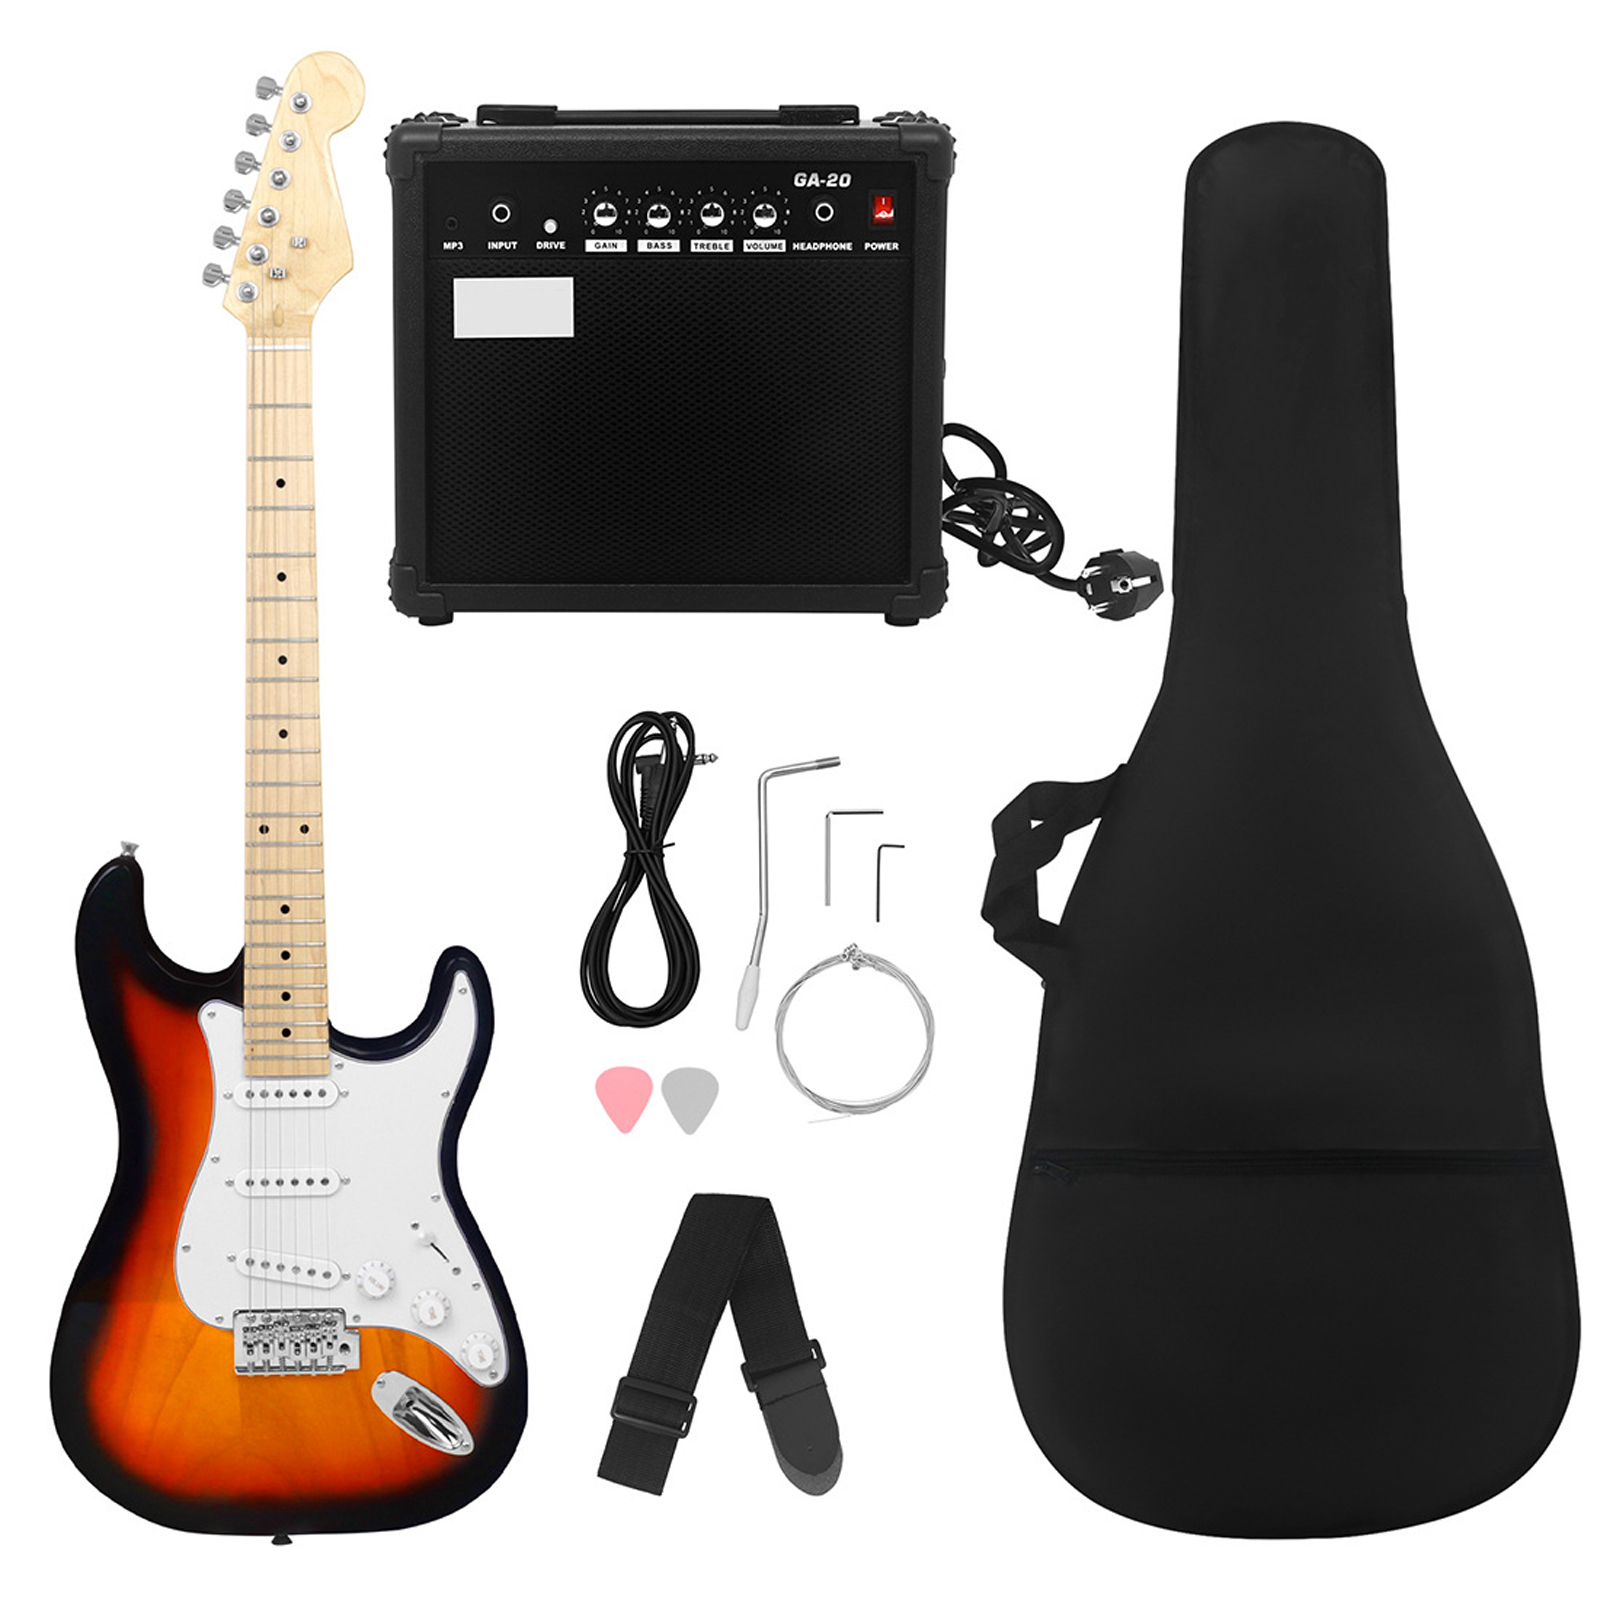 Electric Guitar Beginner Kit Full Size Maple Fingerboard Electric Guitar Accessories With Audio Picks Strap Guitar Bag Strings Cable Rocker Wrench Sunset Black Edge Set